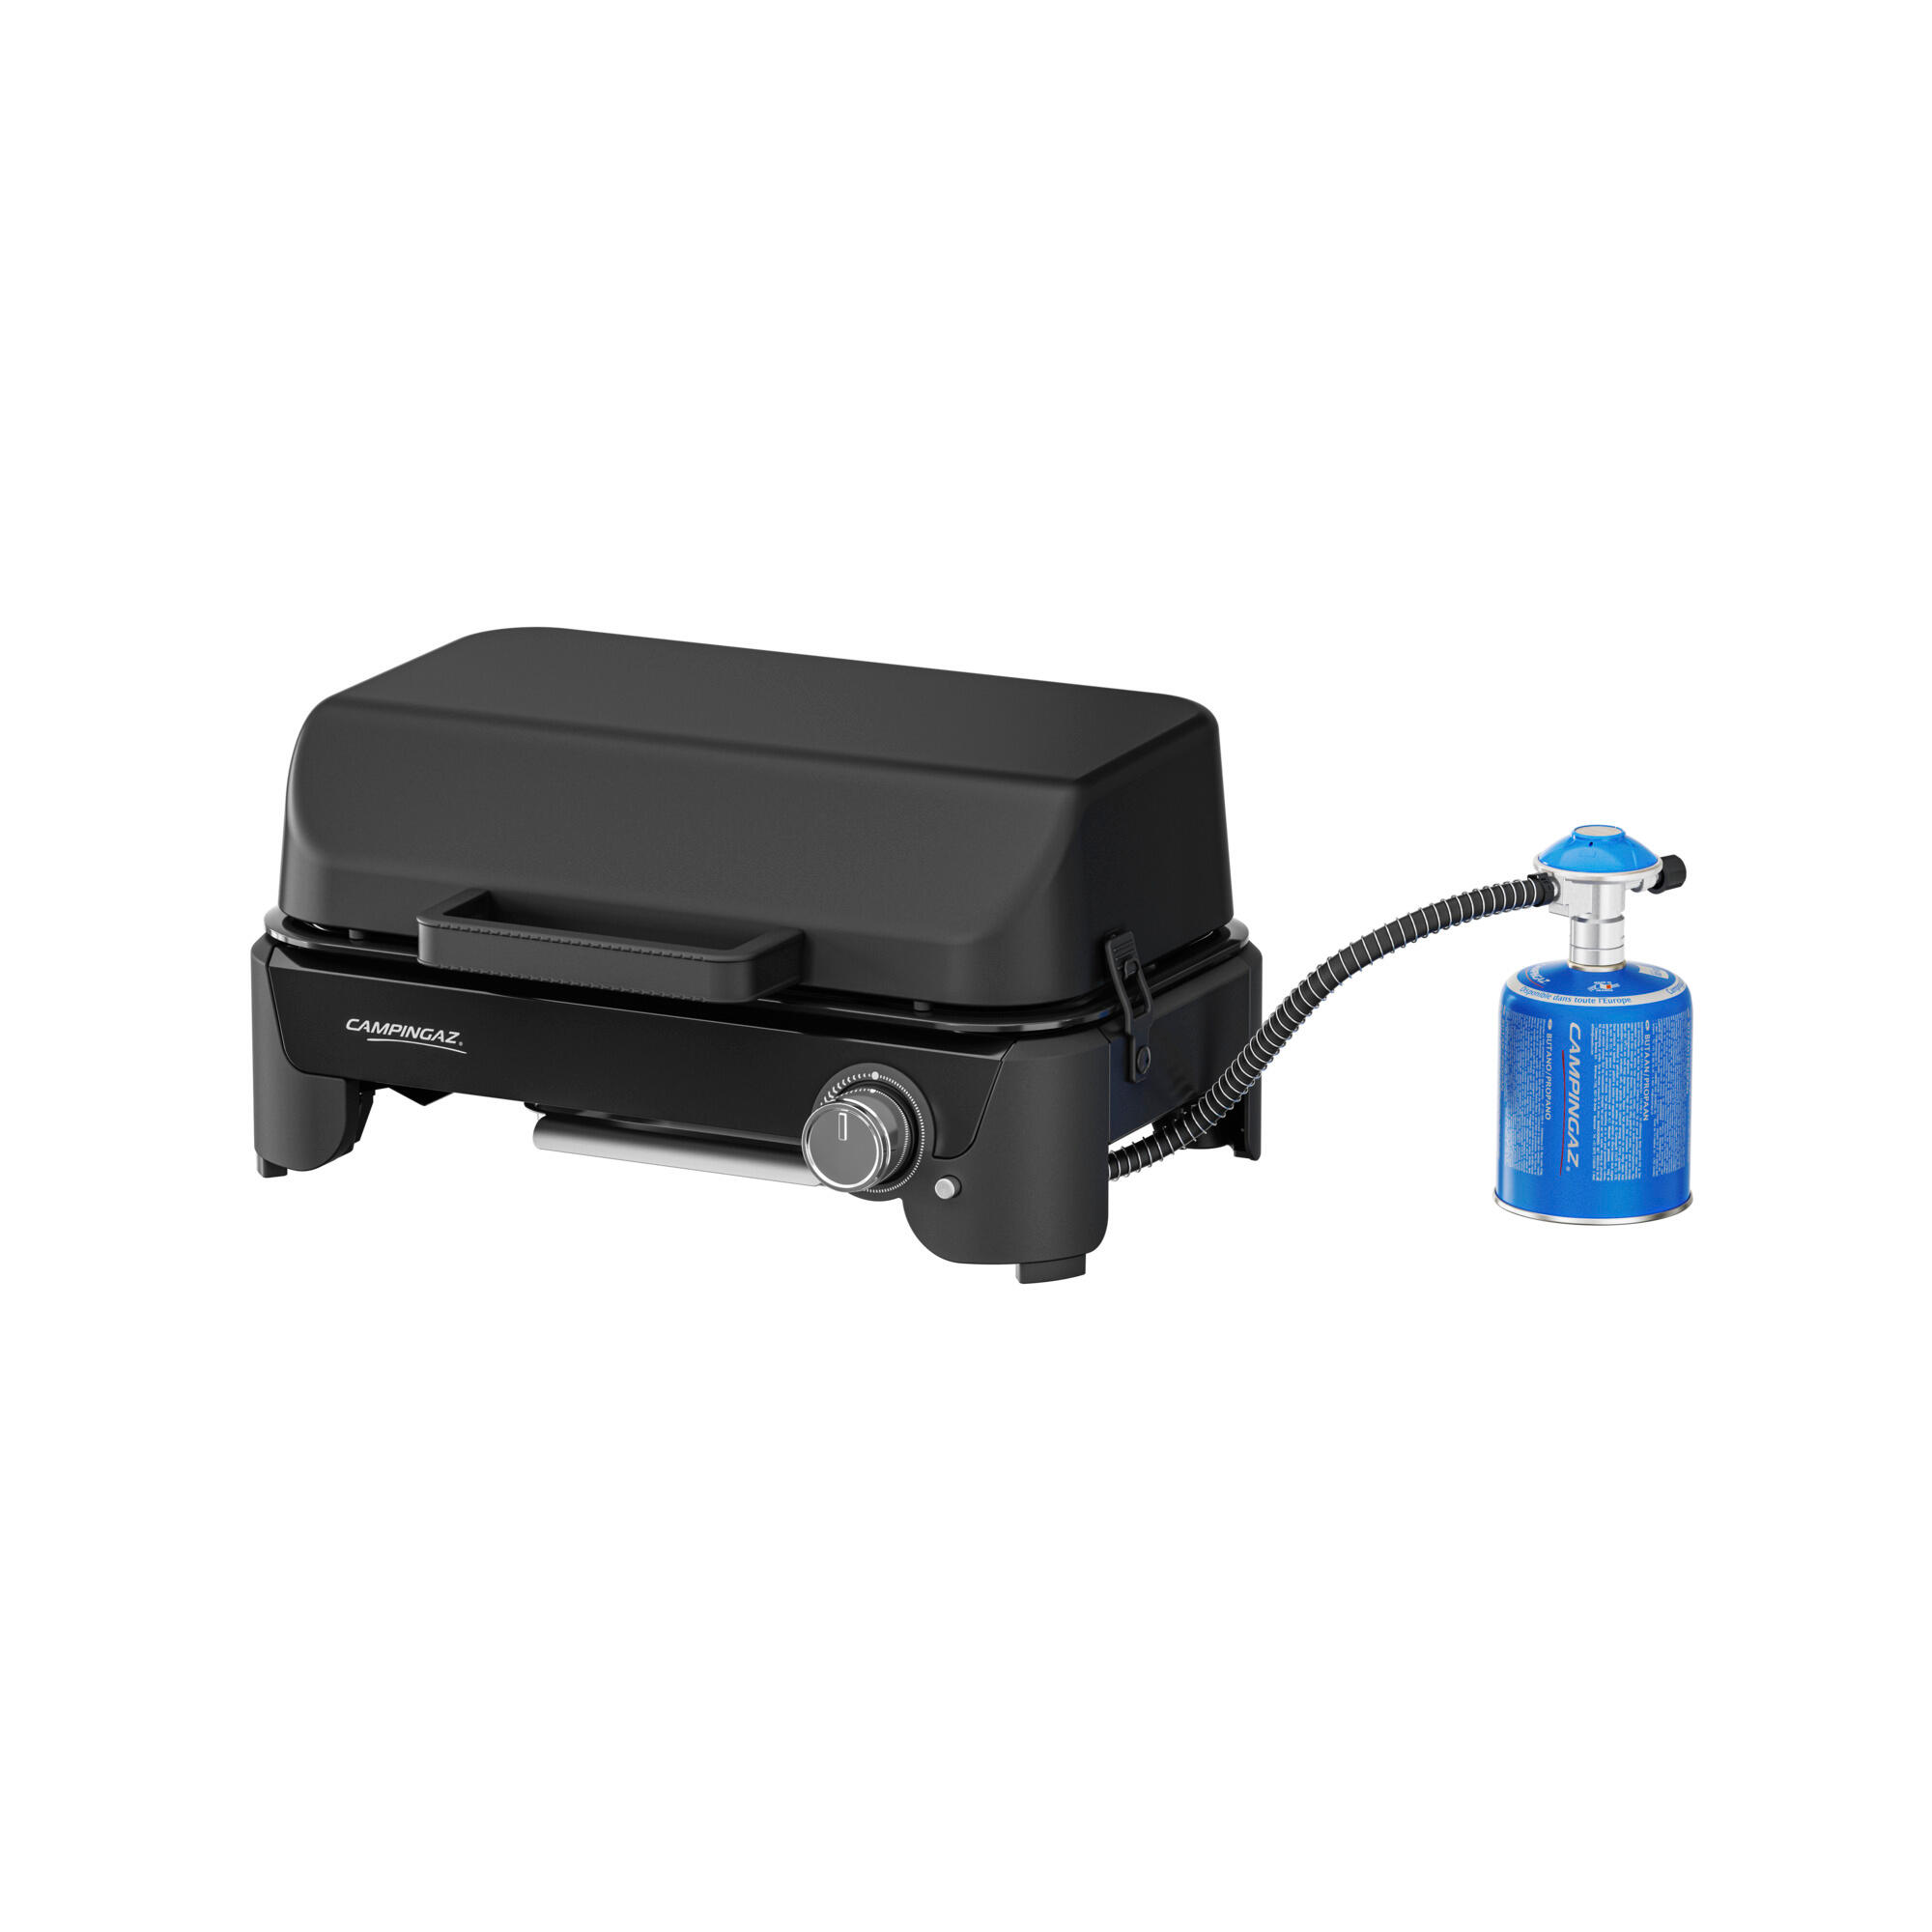 Portable gas barbecue for camping - Campingaz Tour & Grill CG 8/9